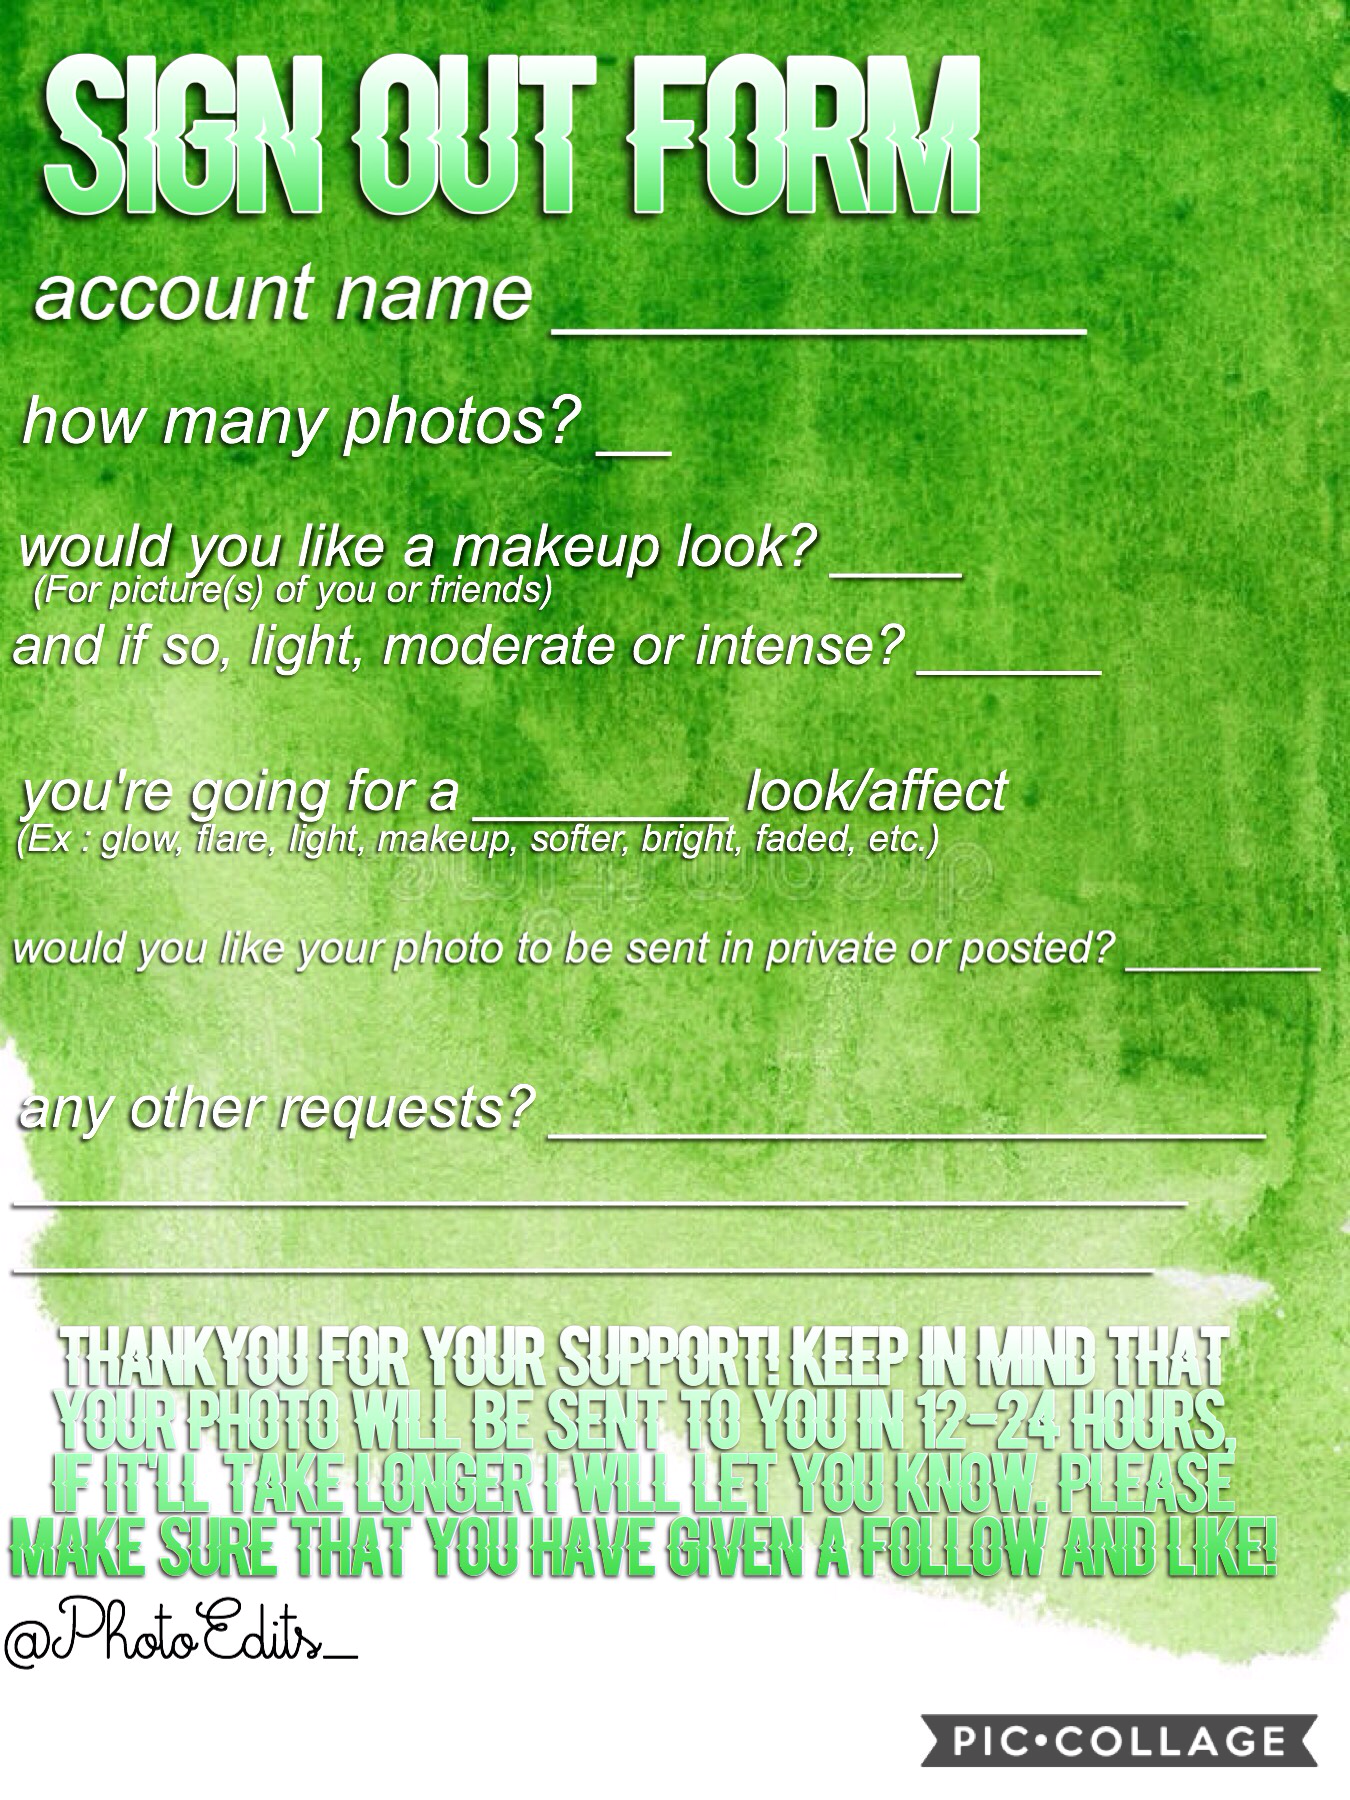 Fill in this form to get your edited photo!